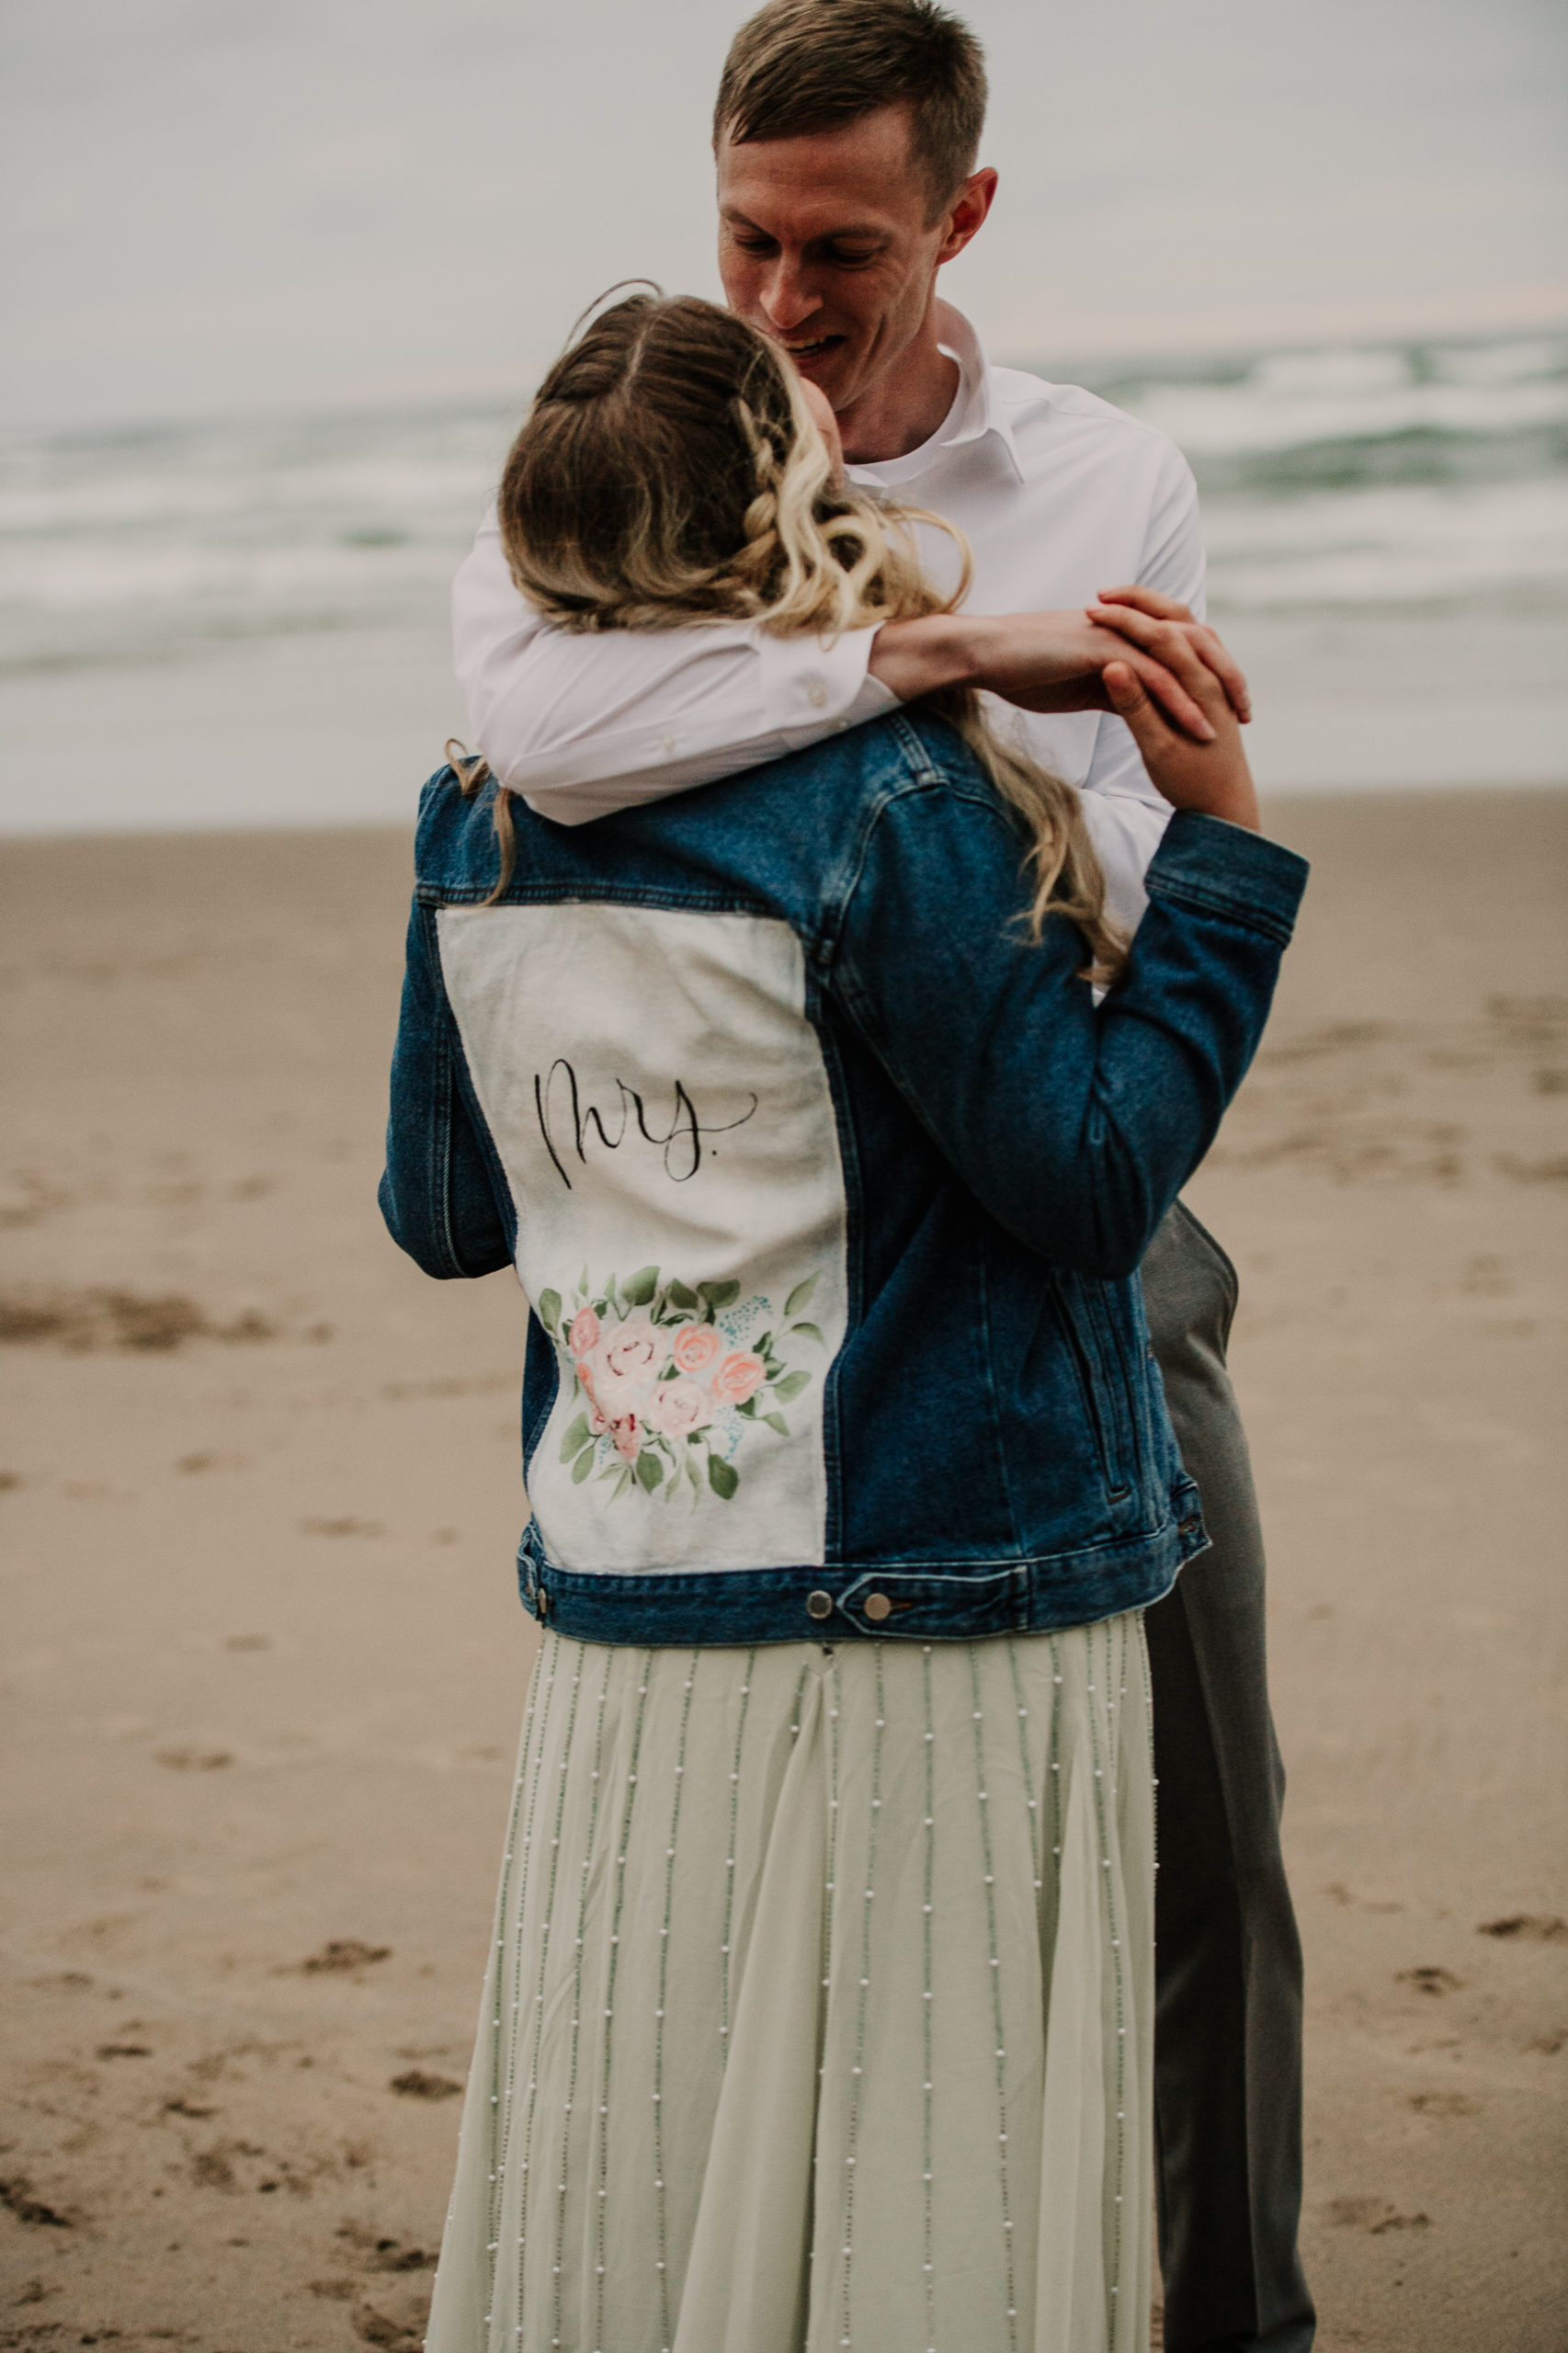 We love being an Oregon coast elopement photographer not only because of the gorgeous views, but the adventure that can happen in Oregon is one of our very favorite things! 

Are you ready for an Oregon coast elopement? We are shelling out all the info on the best of the Oregon coast. The three spots that capture our hearts in this blog are Hug Point, Arch Cape, and Cannon Beach. All of which are within a ten minute drive from each other! This stretch of magic is technically called "The North Coast" which stretches from the Columbia River to Cascade Head.
